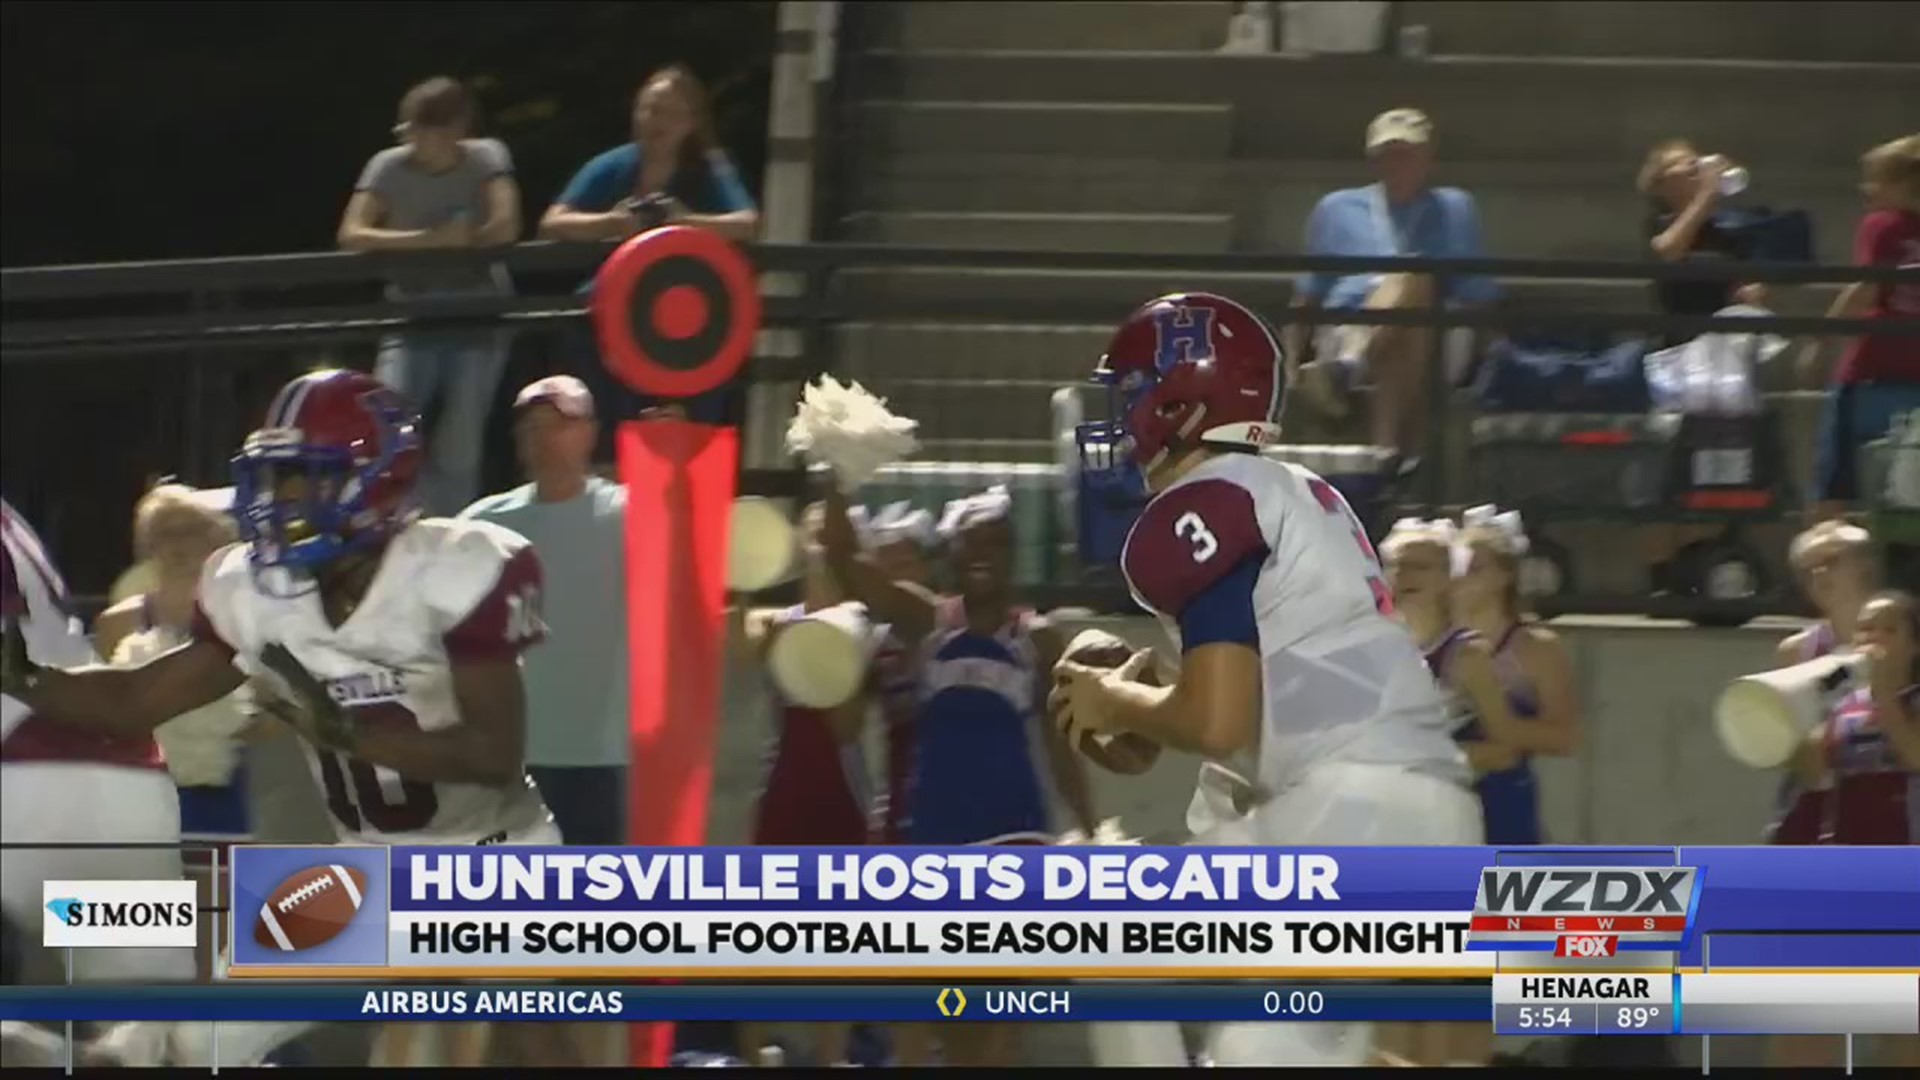 Huntsville hosts Decatur at Milton Frank in their season opener. According to the AHDFHS, this will be the 90th meeting between the two squads..